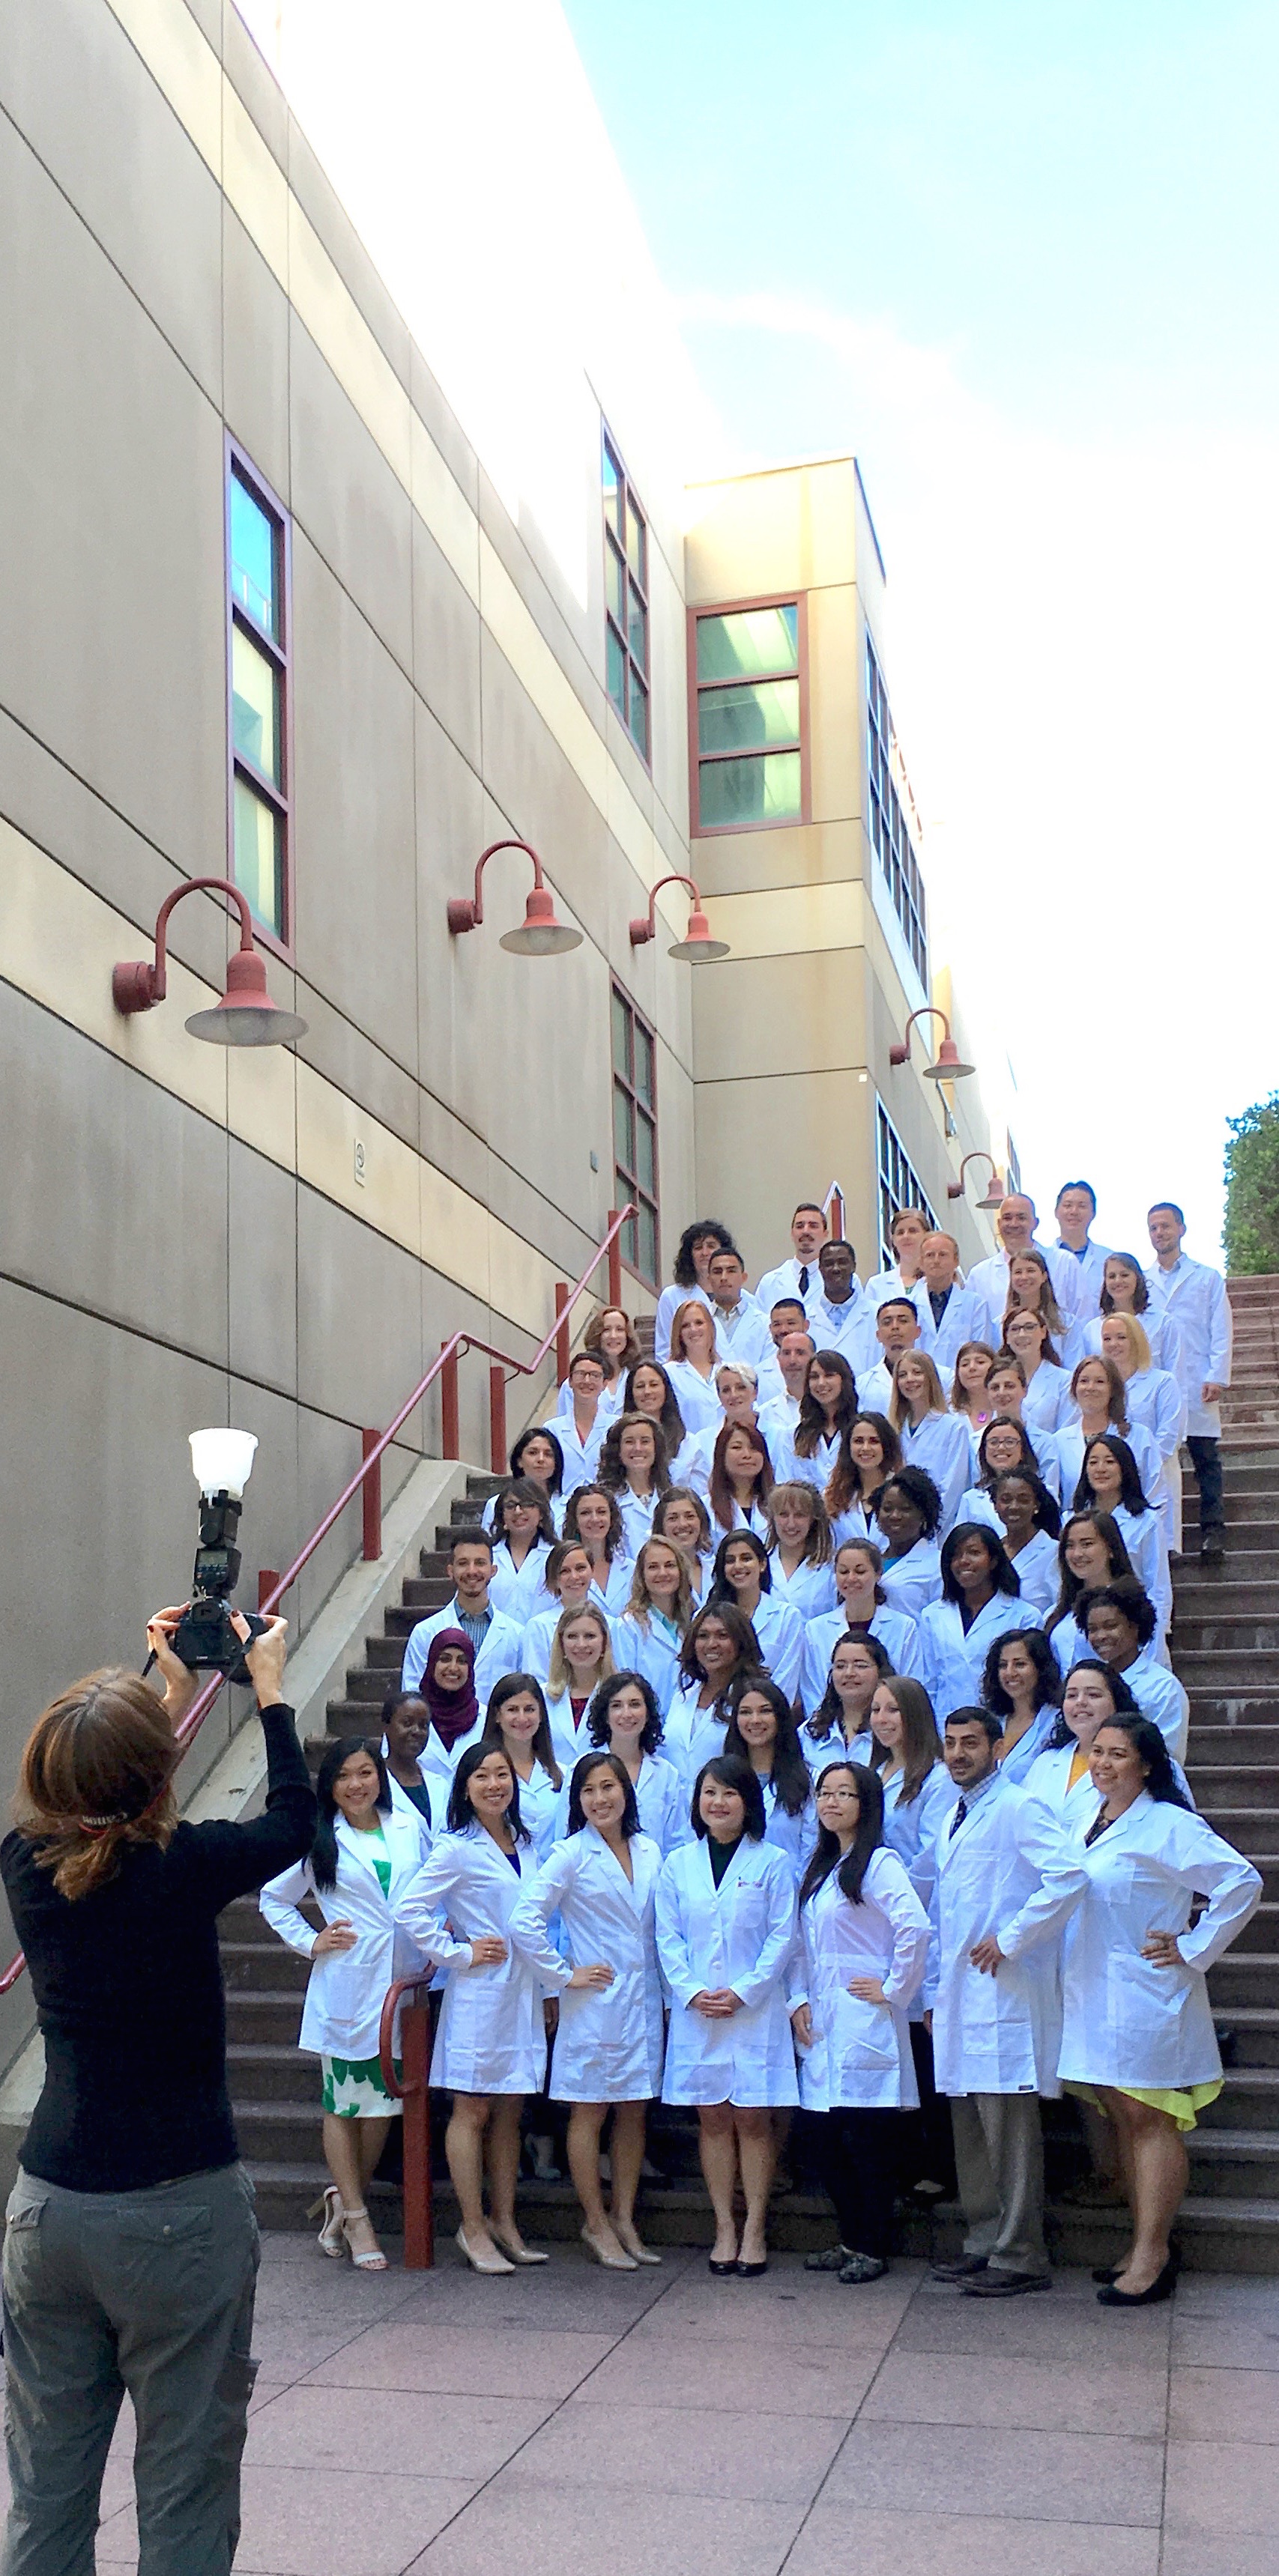 Photographer Susan Merrell takes a photo of our newest cohort of MEPN students.